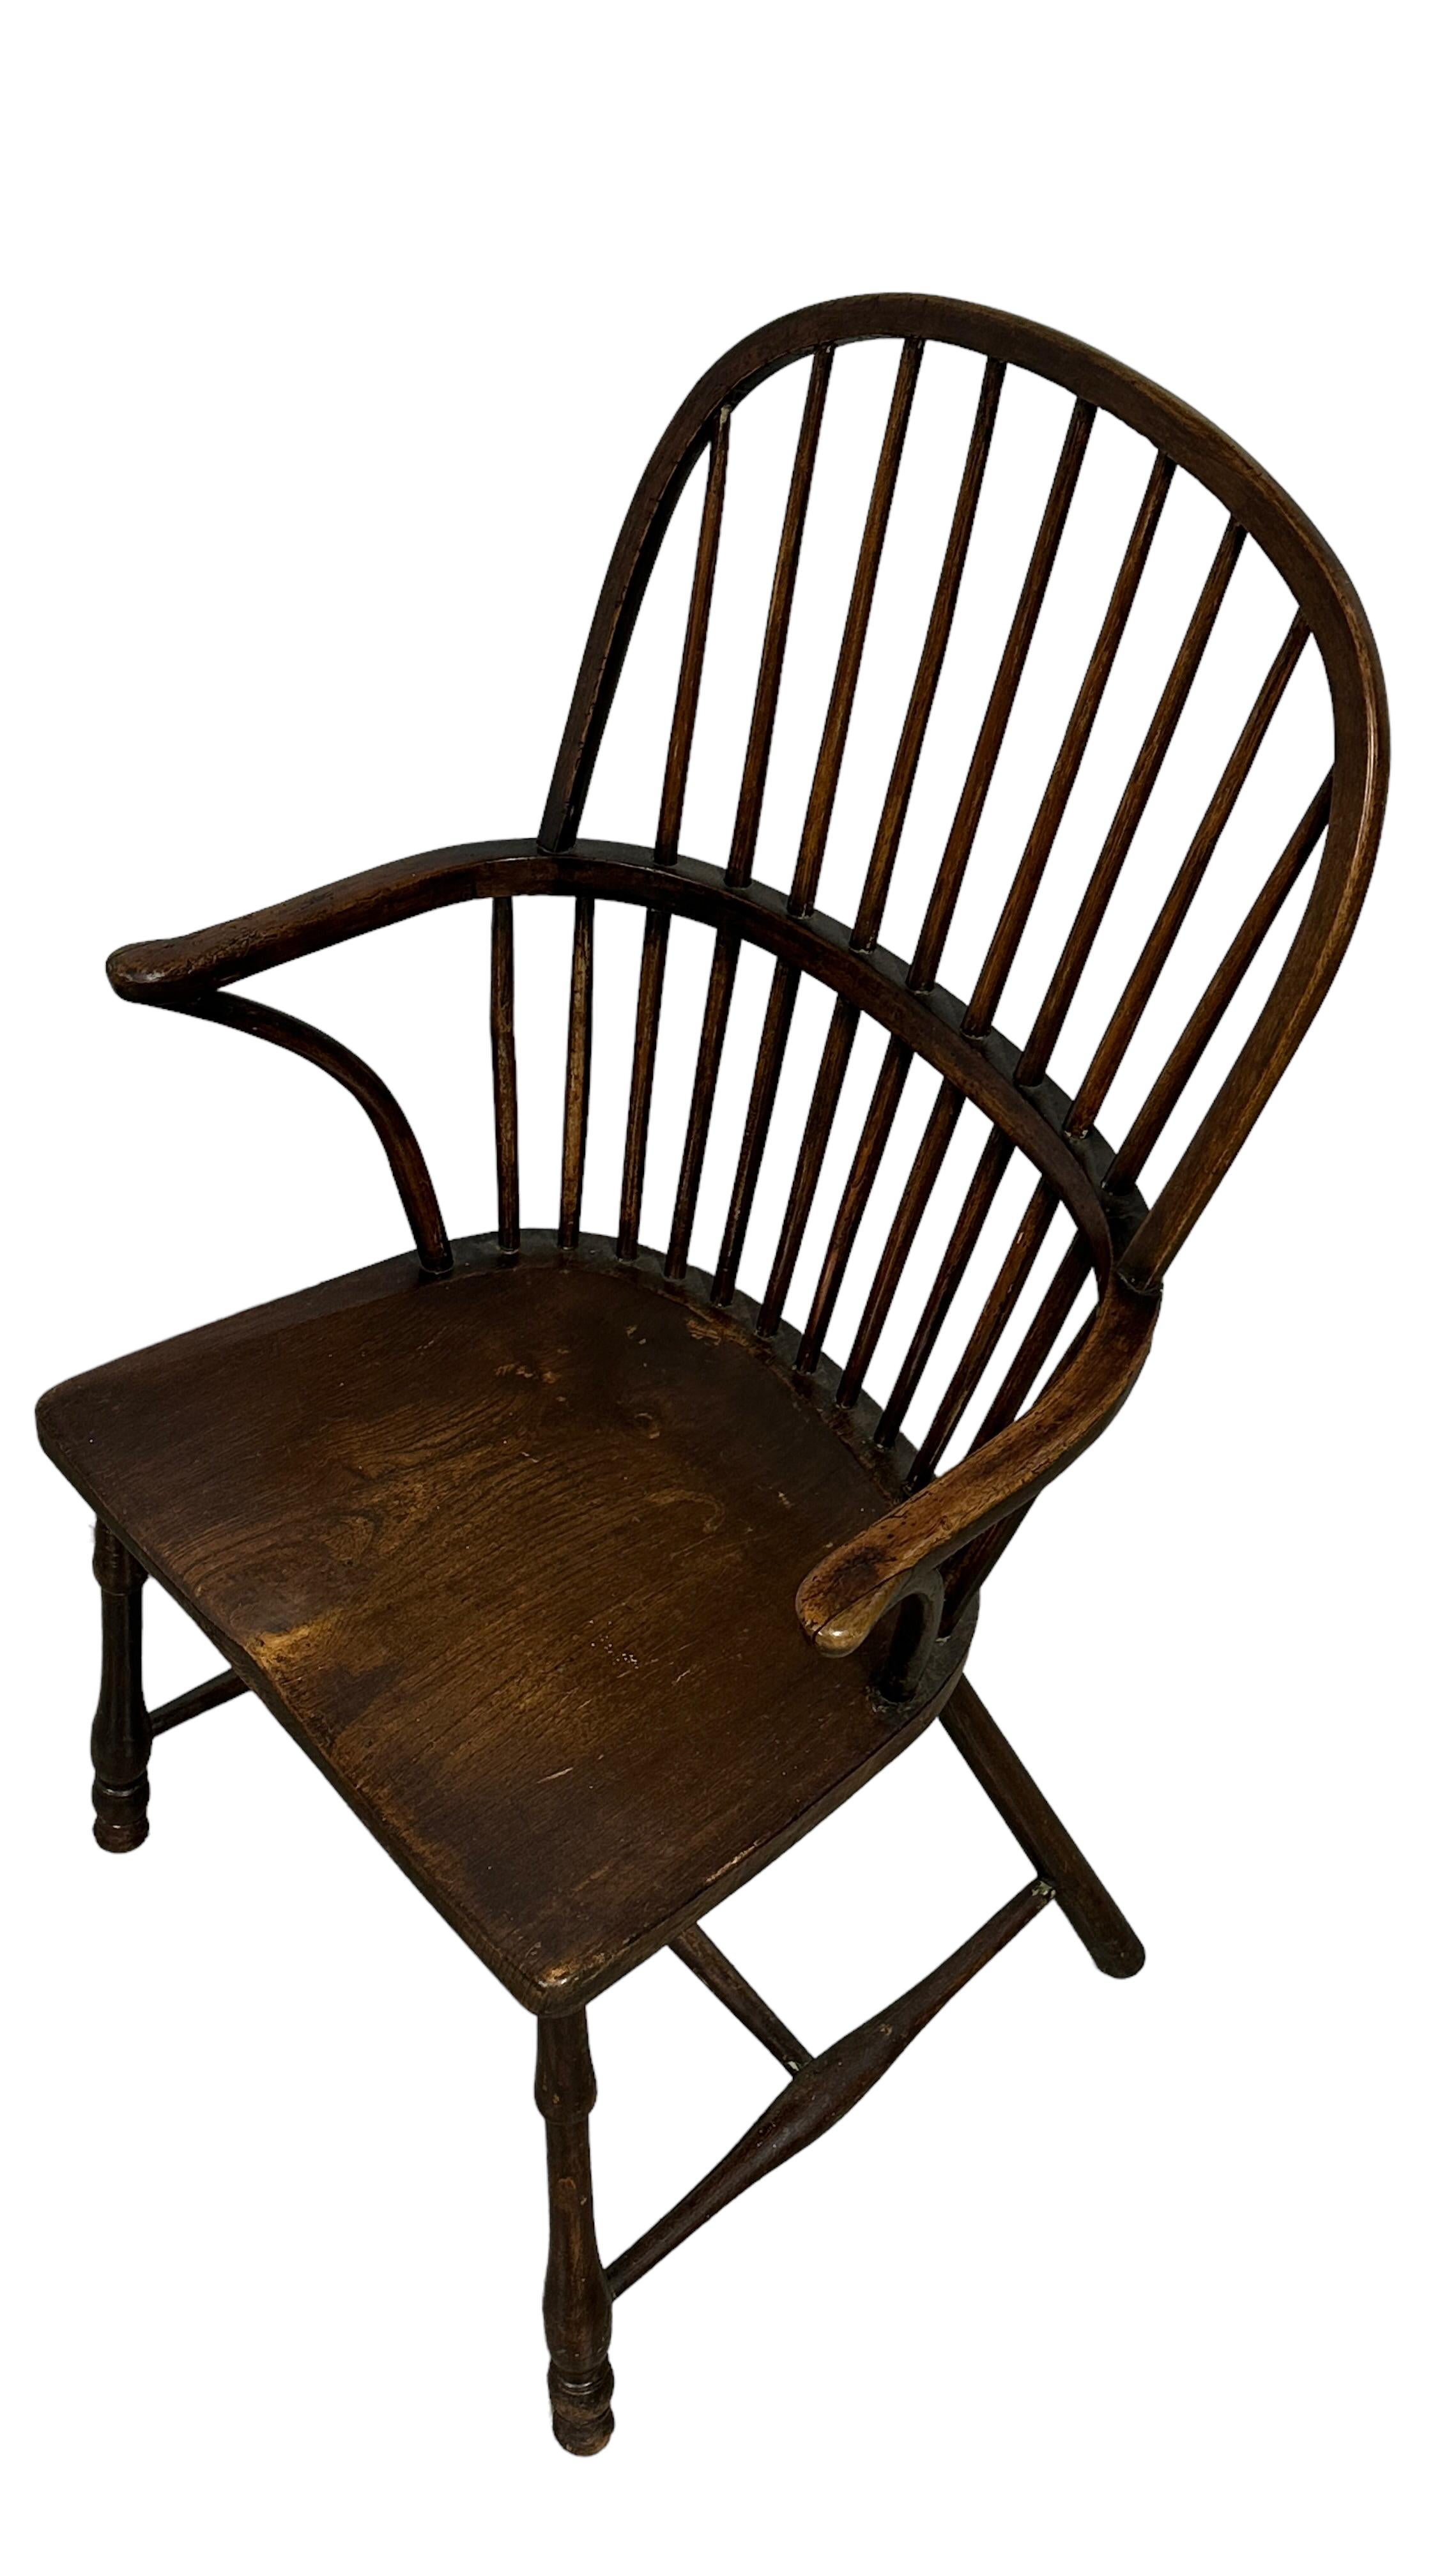 Beautiful Antique Windsor Wooden Chair, 19th Century, England 9